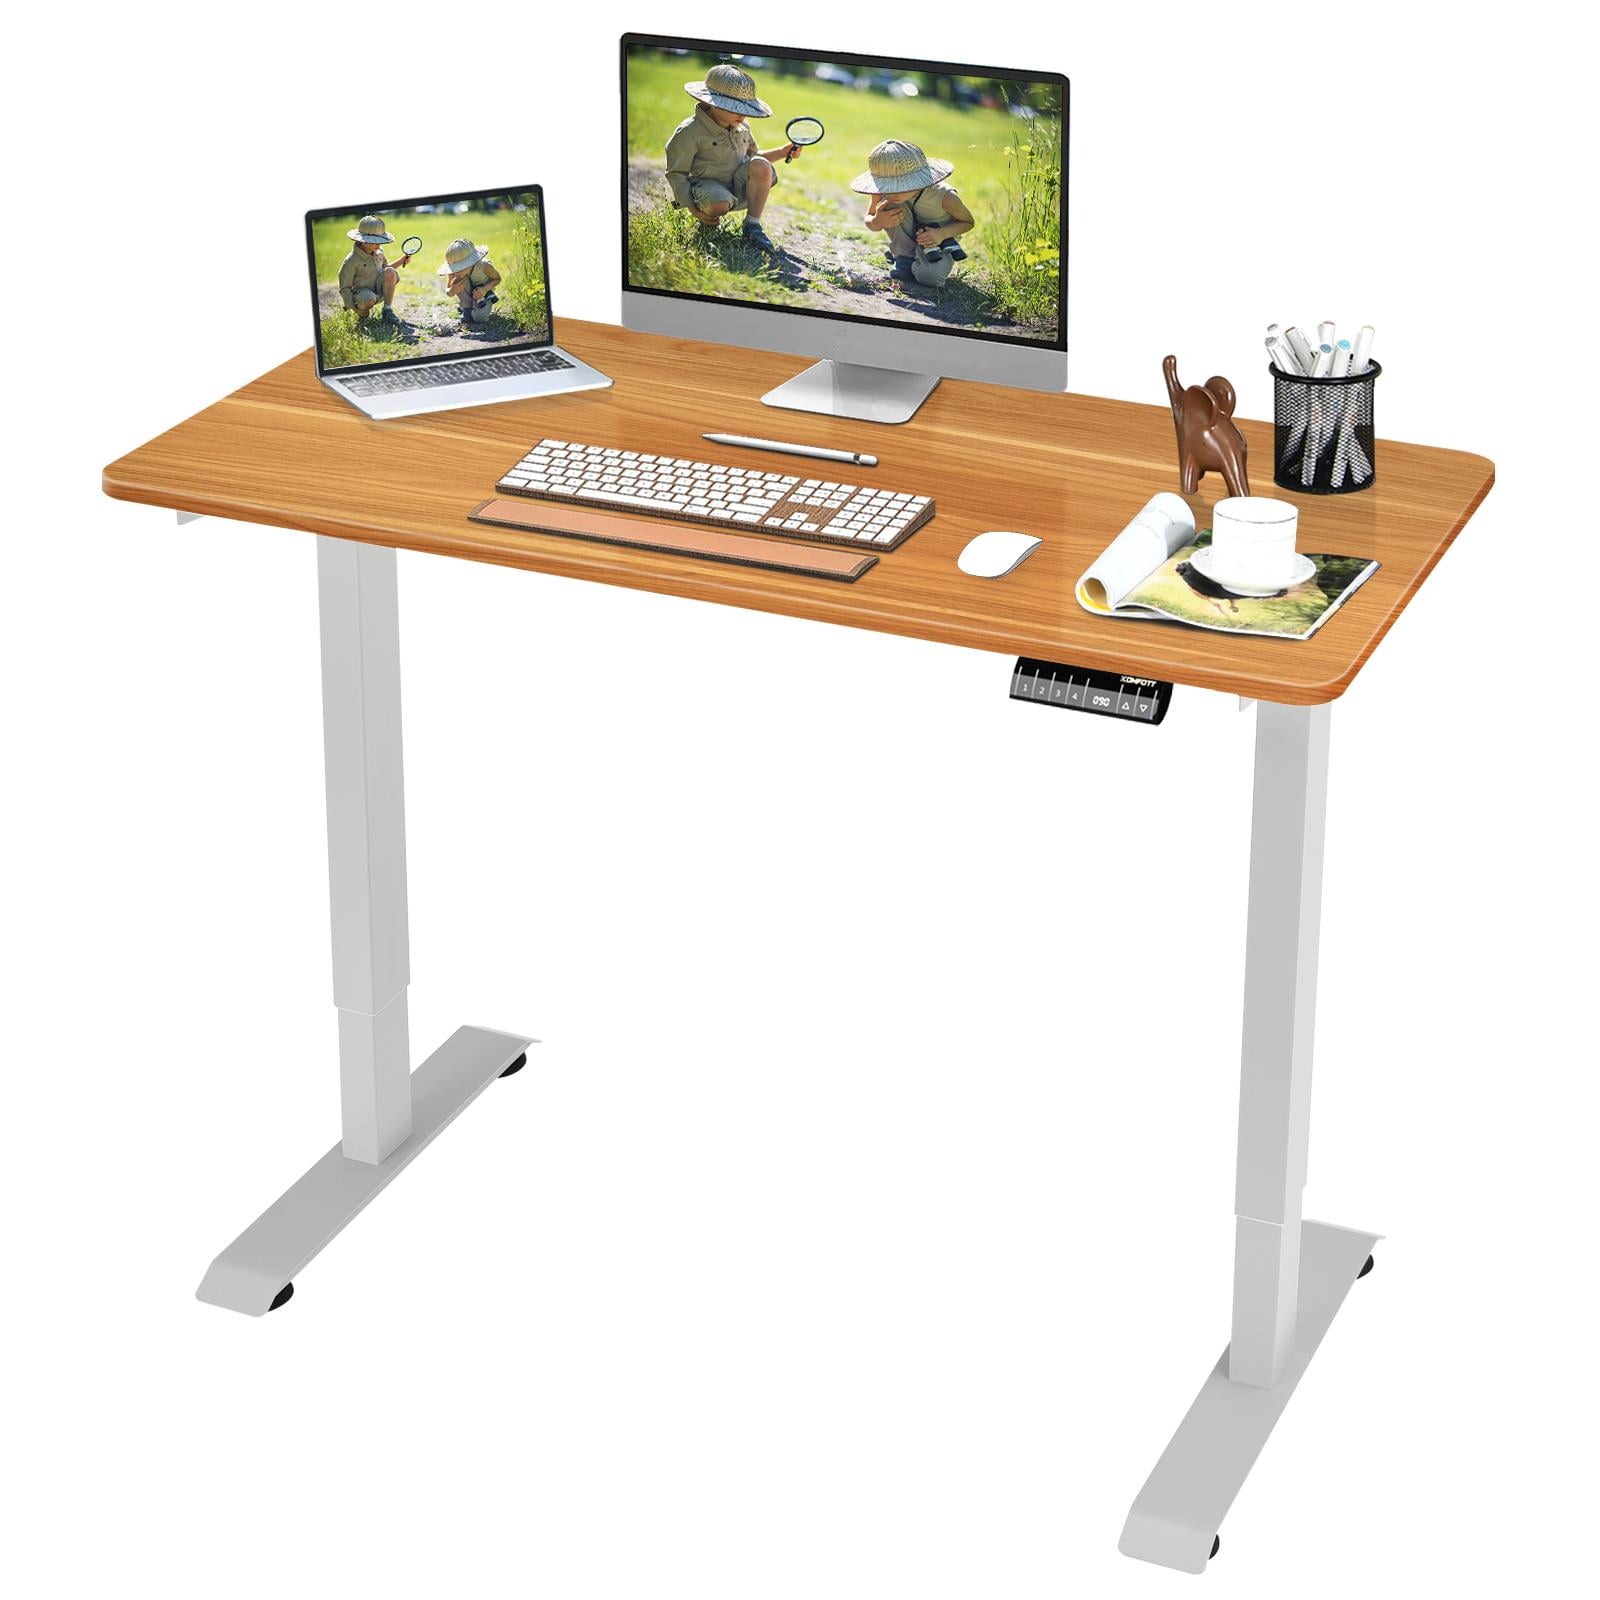 Sit-stand desks and other 'game changers' for ADHD at work